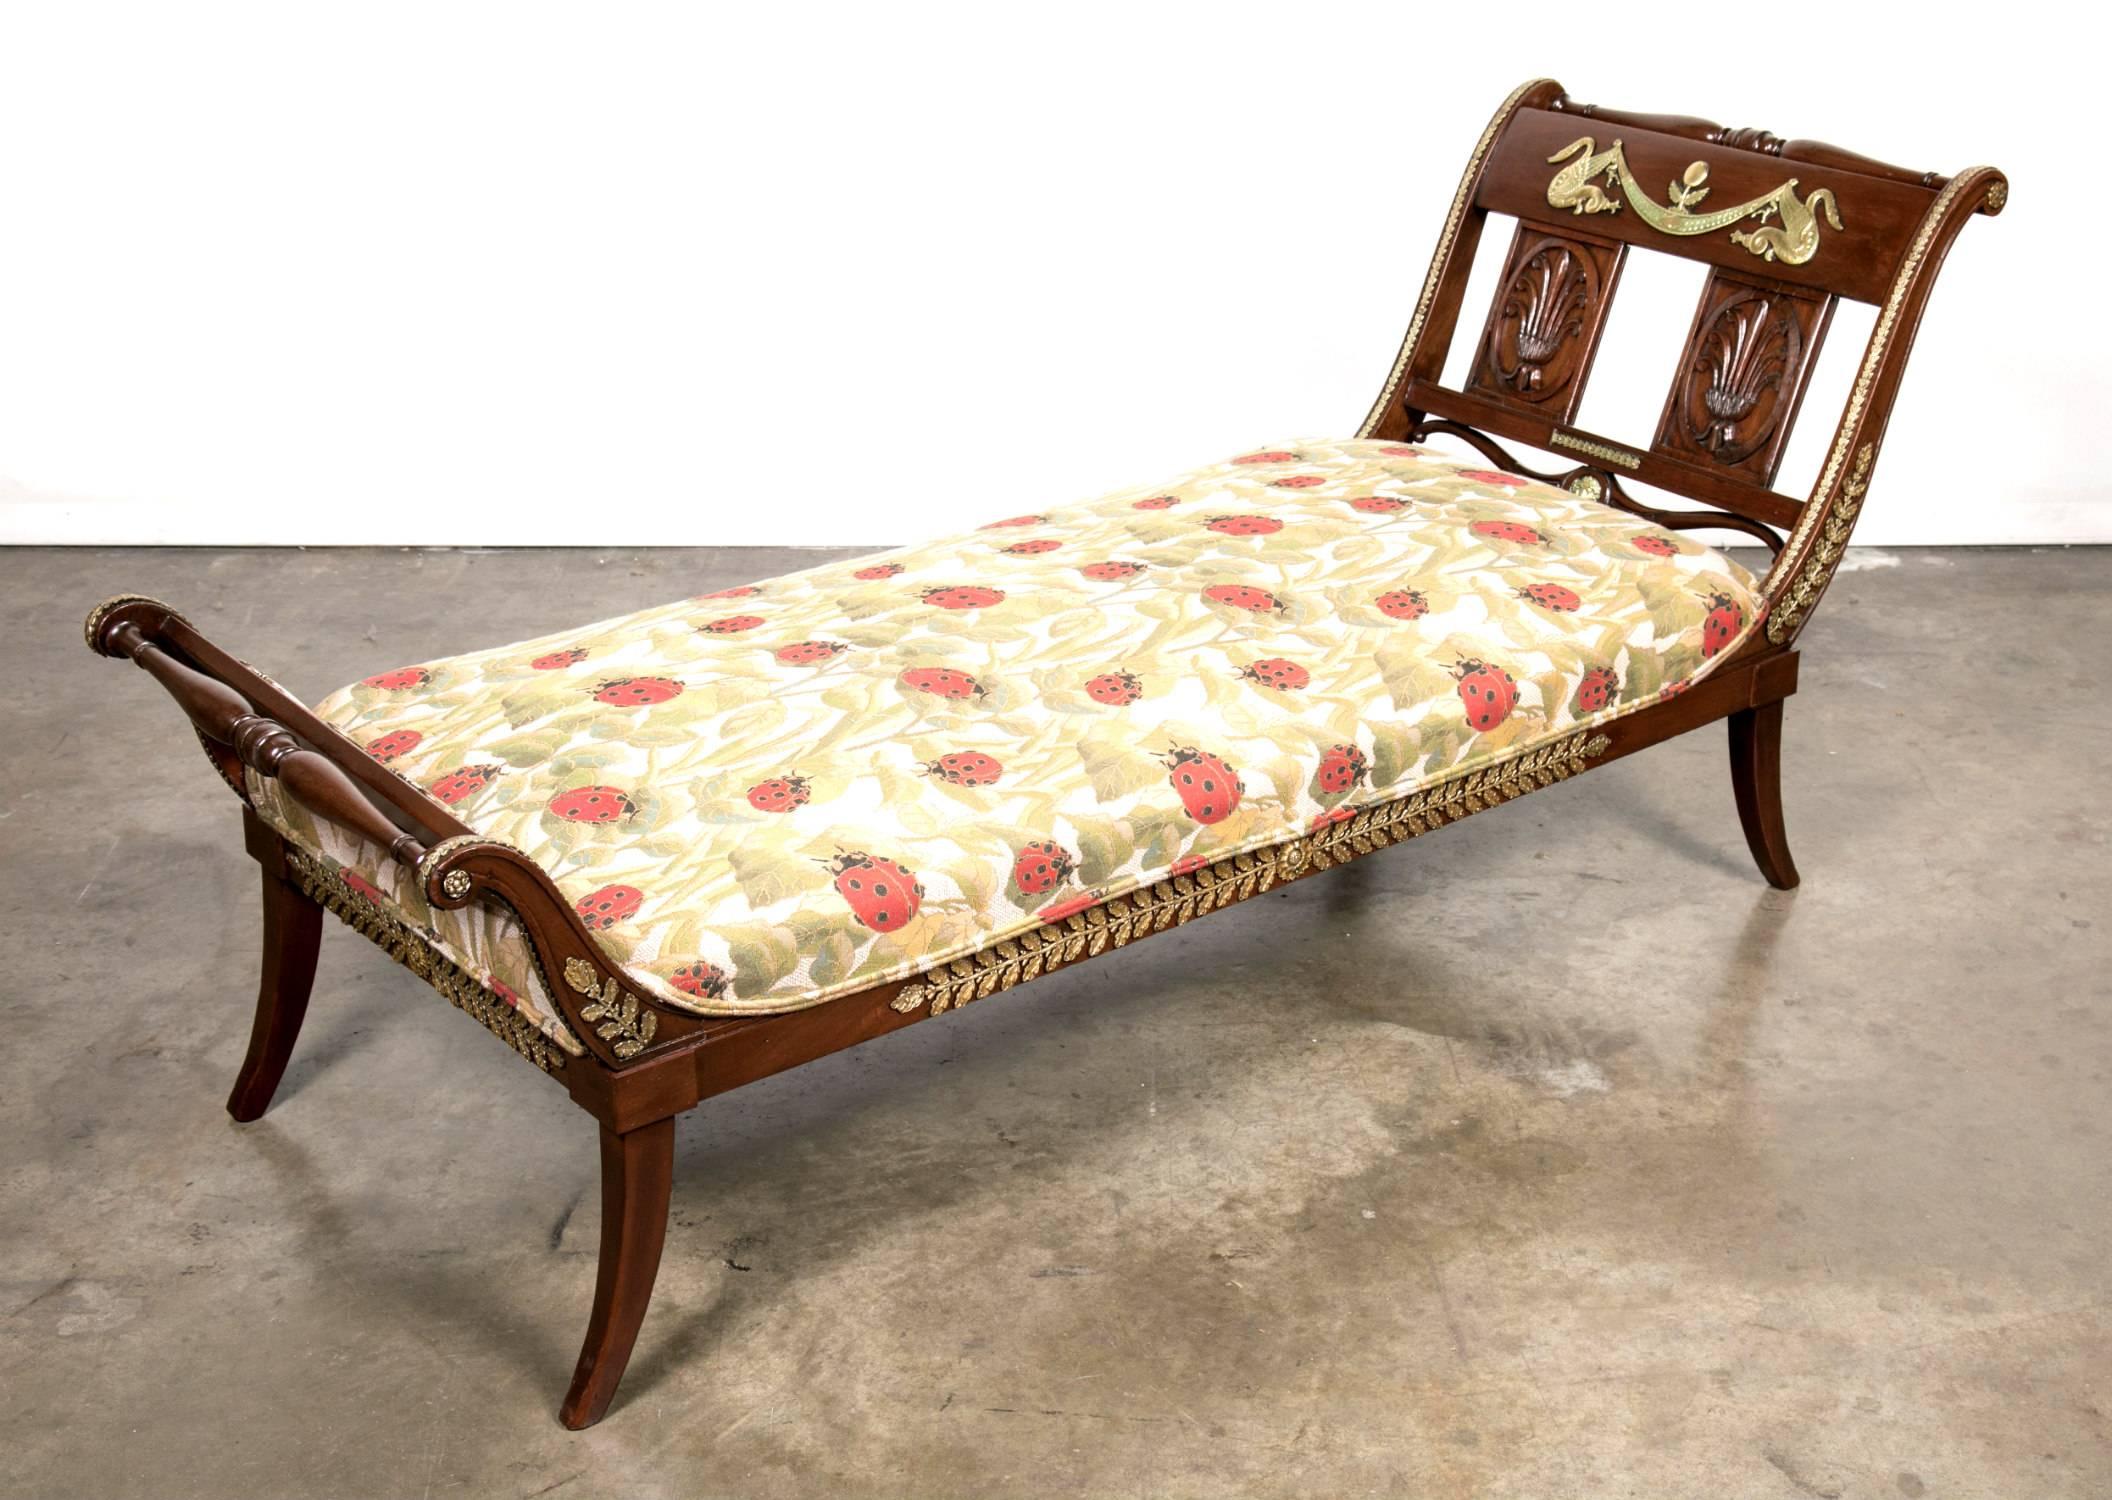 Exquisite early 19th century French Empire period mahogany lit de repos or chaise longue with ornate bronze mounted classical decoration to the sides, back, and foot. A fine showcase of craftsmanship, fully finished on all sides, with a wonderful